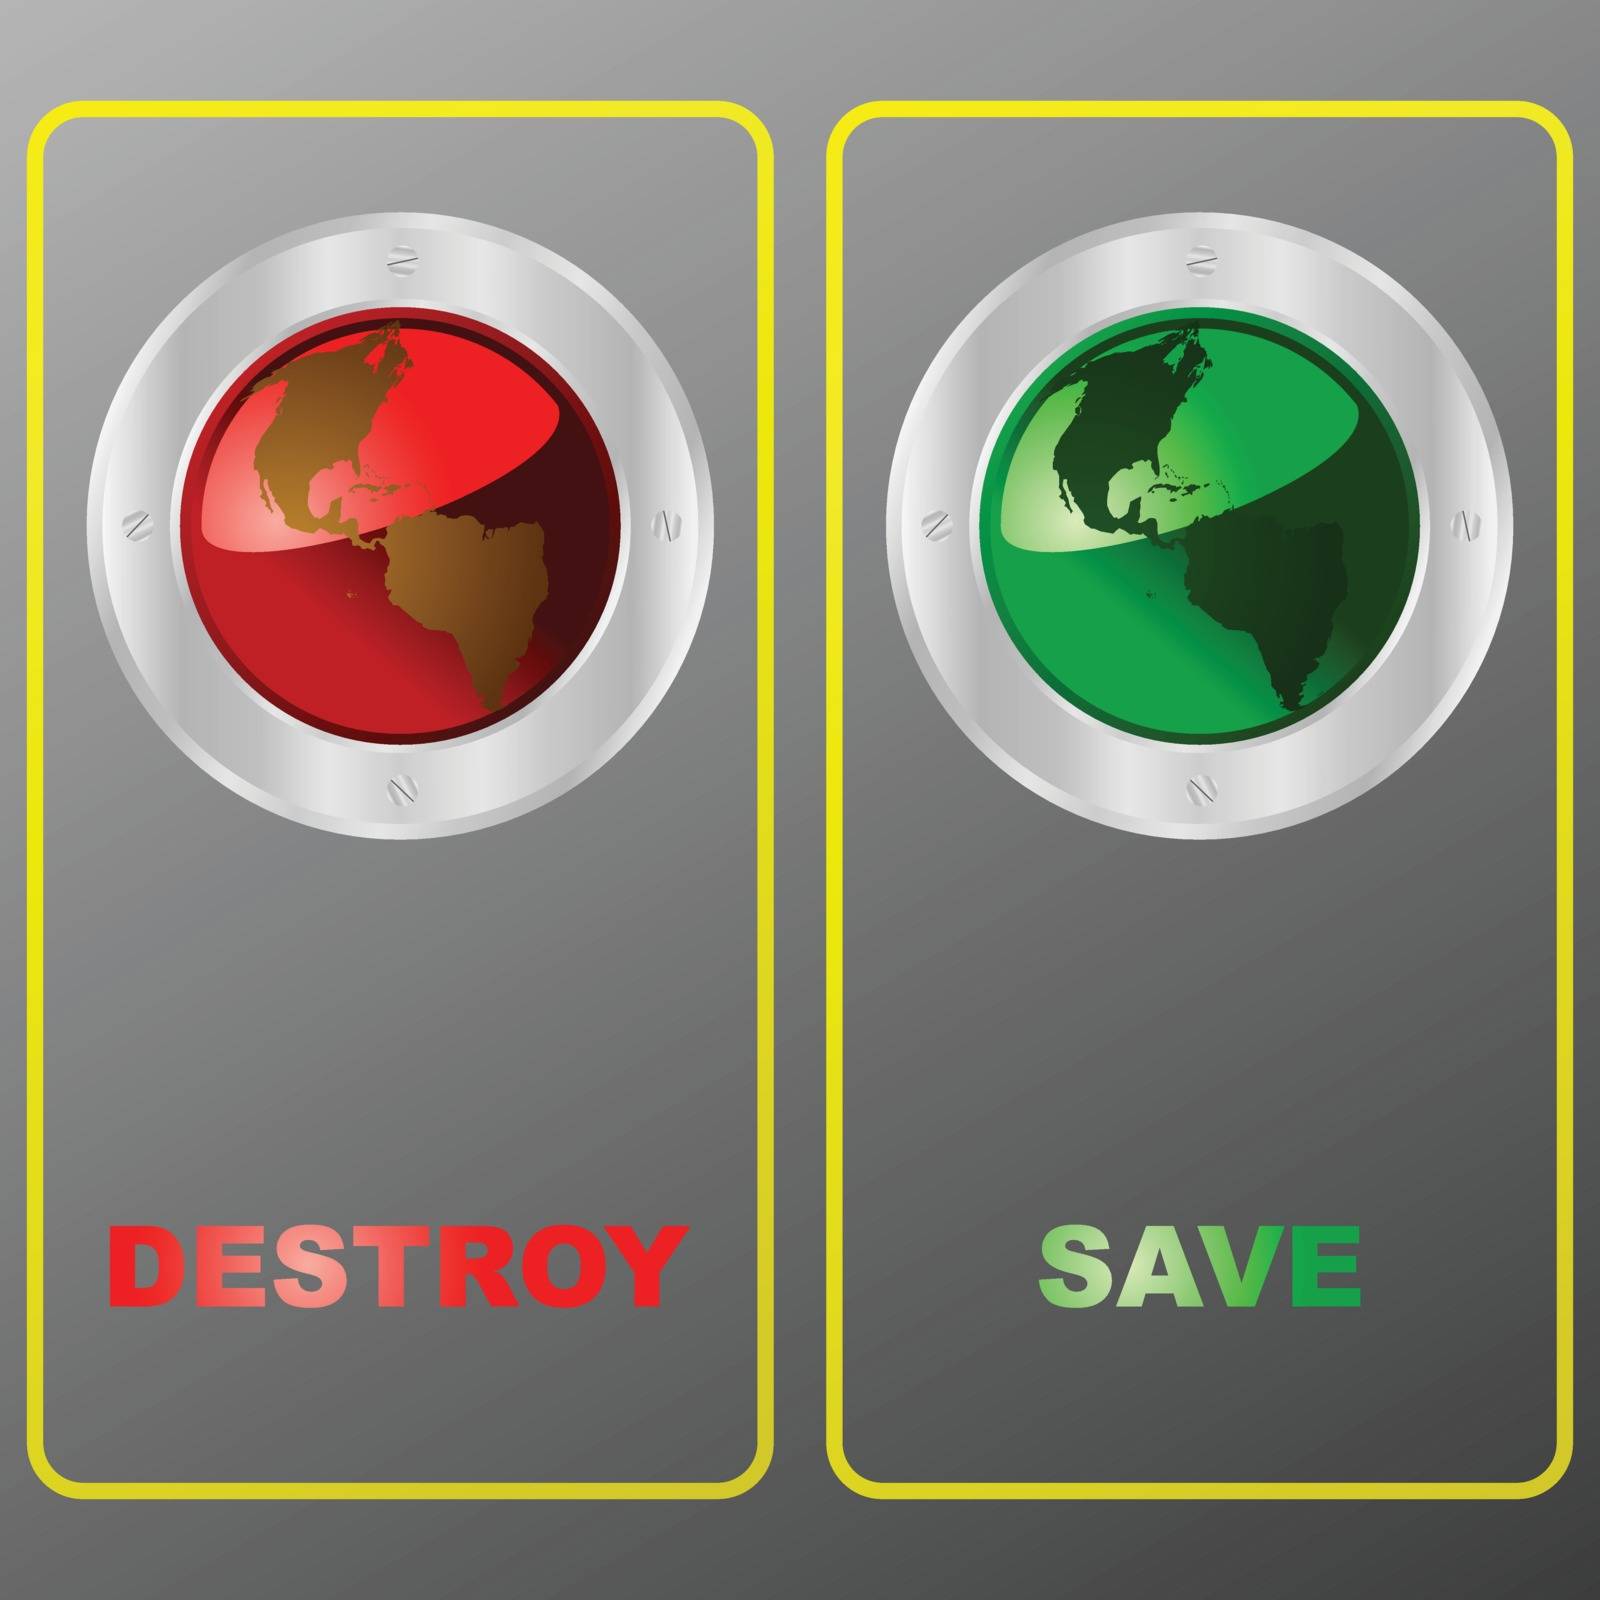 Illustration of a panel with two buttons: one for destroying and one for saving the planet